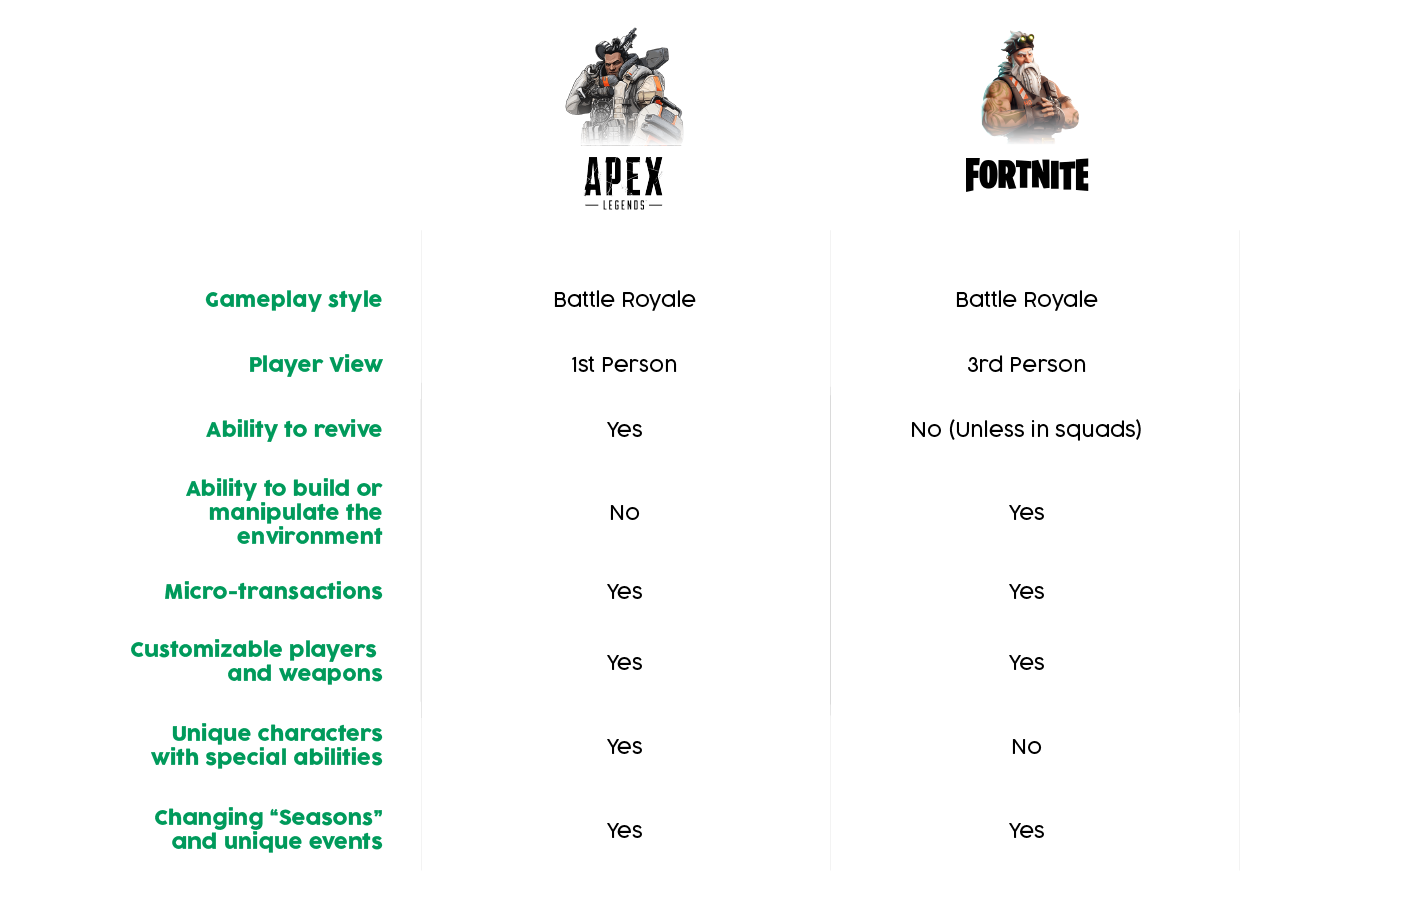 Differences between Fortnite and Apex Legends